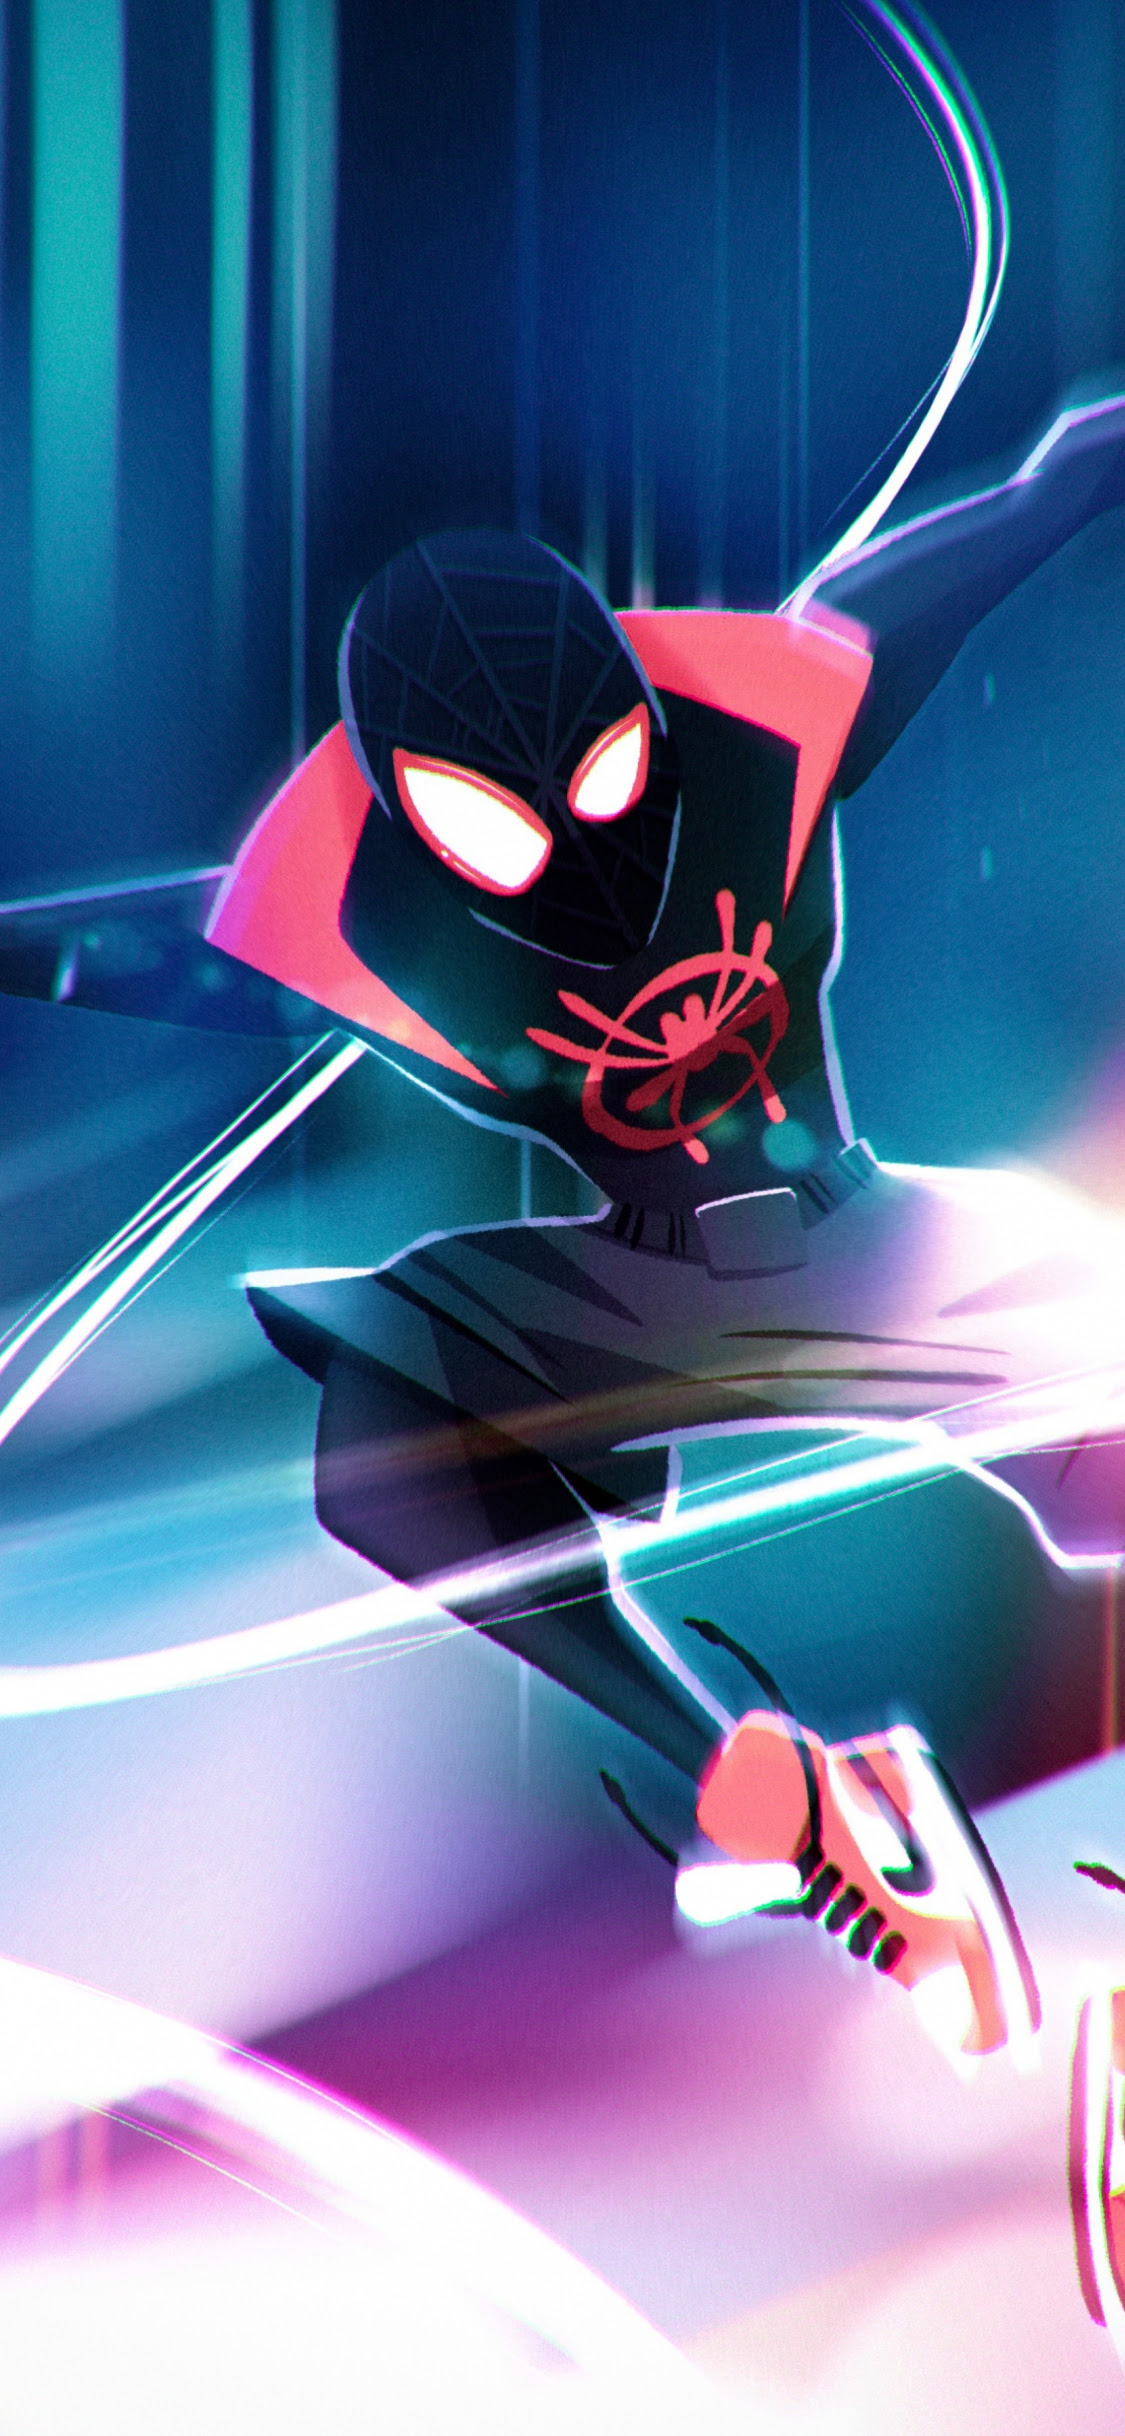 Anime Images Spider Man Into The Spider Verse Wallpaper Iphone 8 Plus